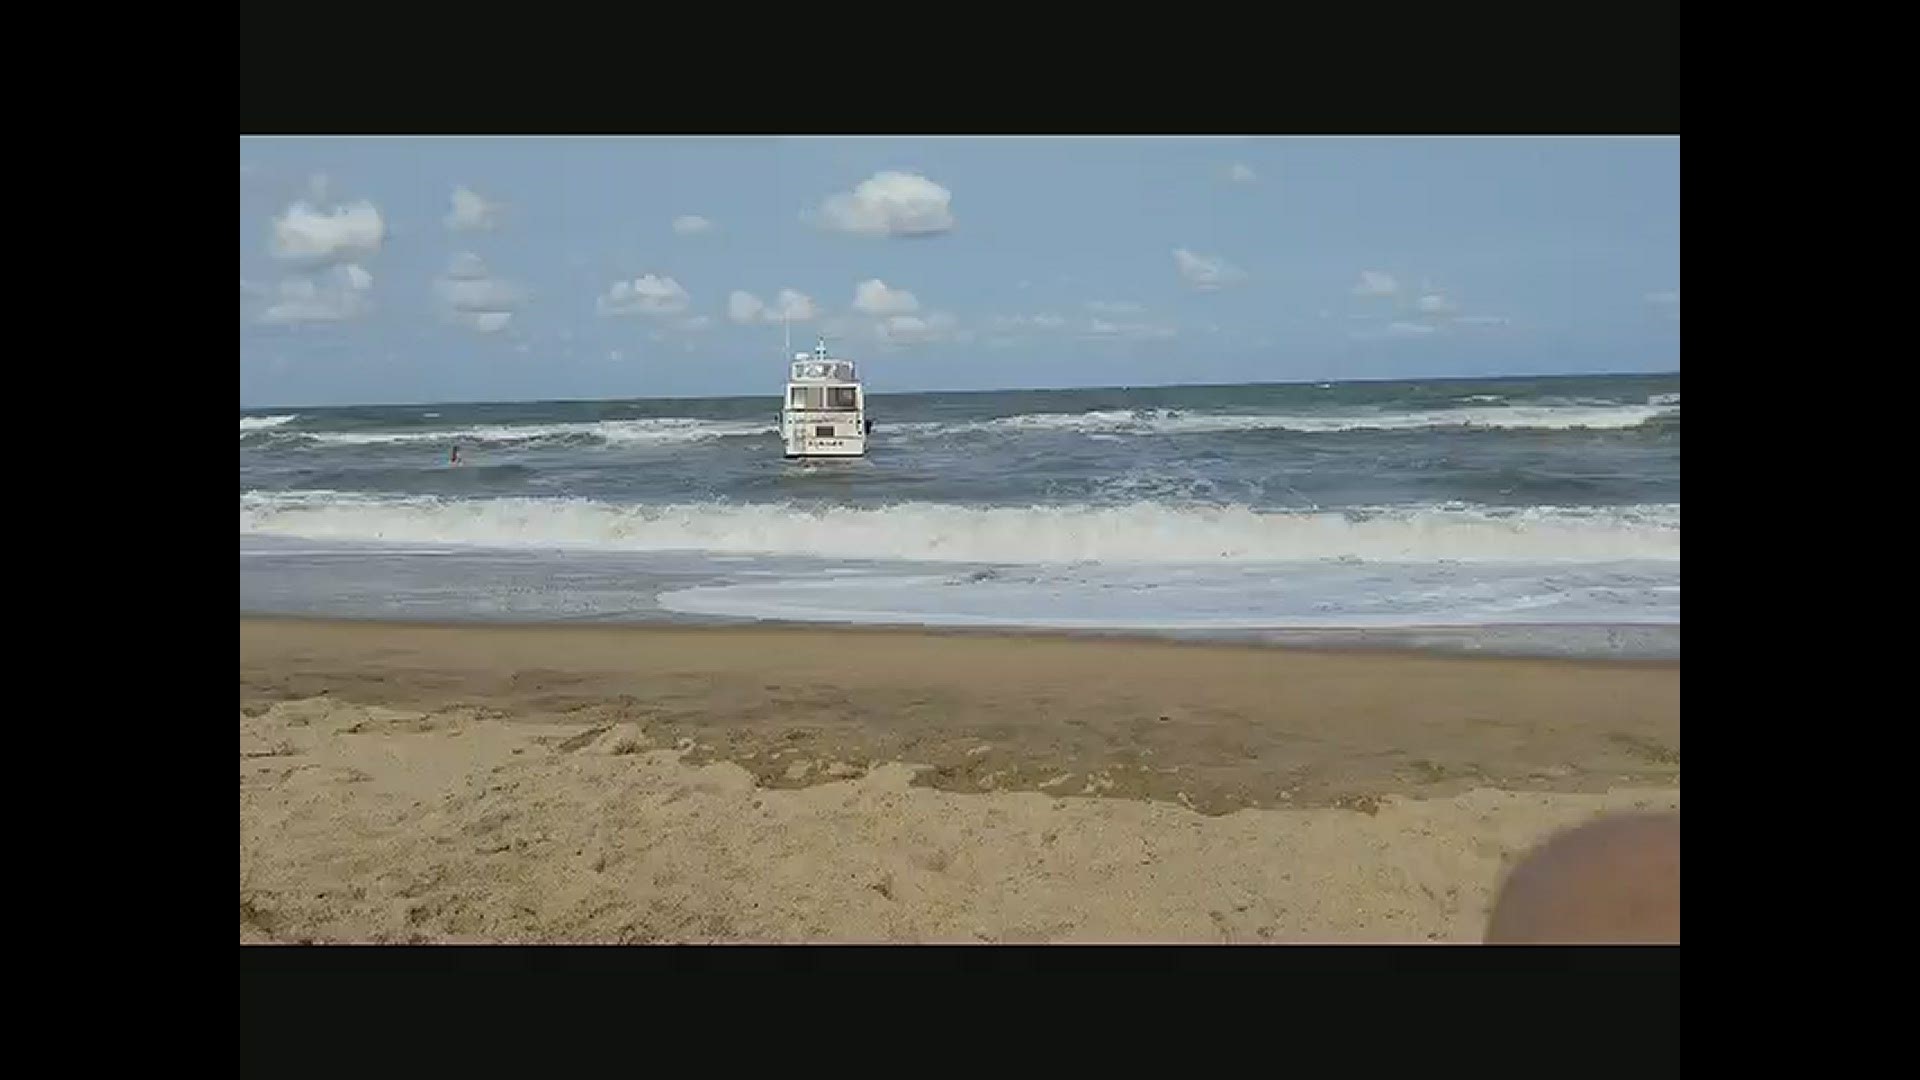 A boat broke down and drifted onto the shores of Virginia Beach. Two people were on board, but weren't hurt.